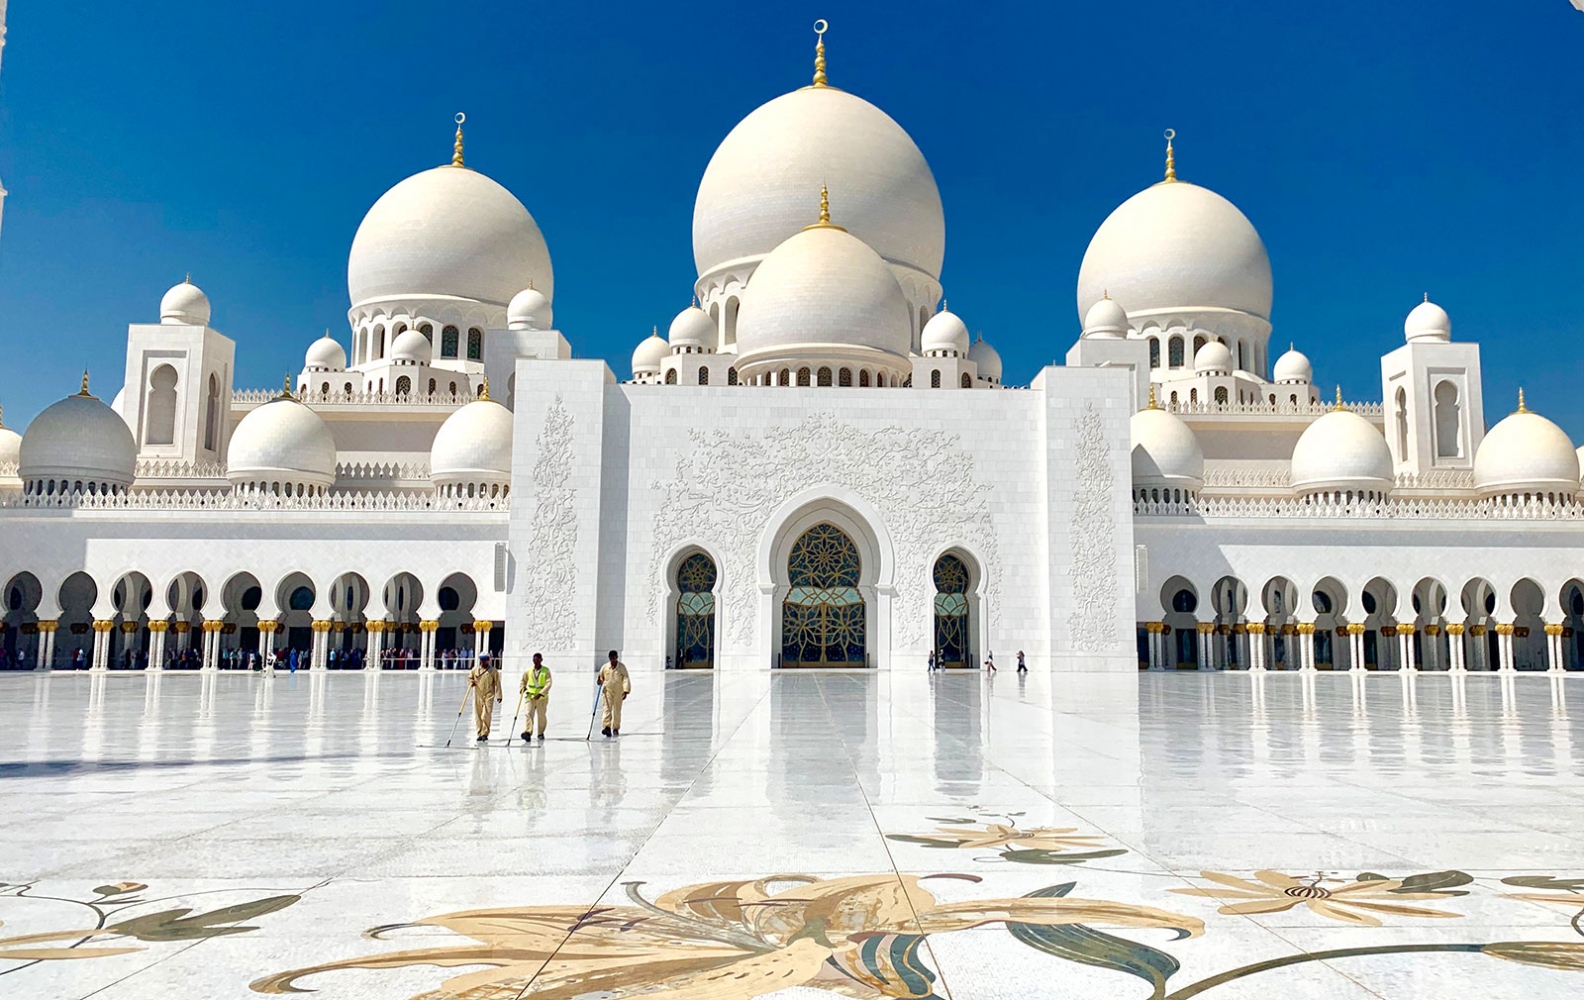 Image from Architecture - The  Sheikh Zayed  Grand  Mosque  - Abu Dhabi